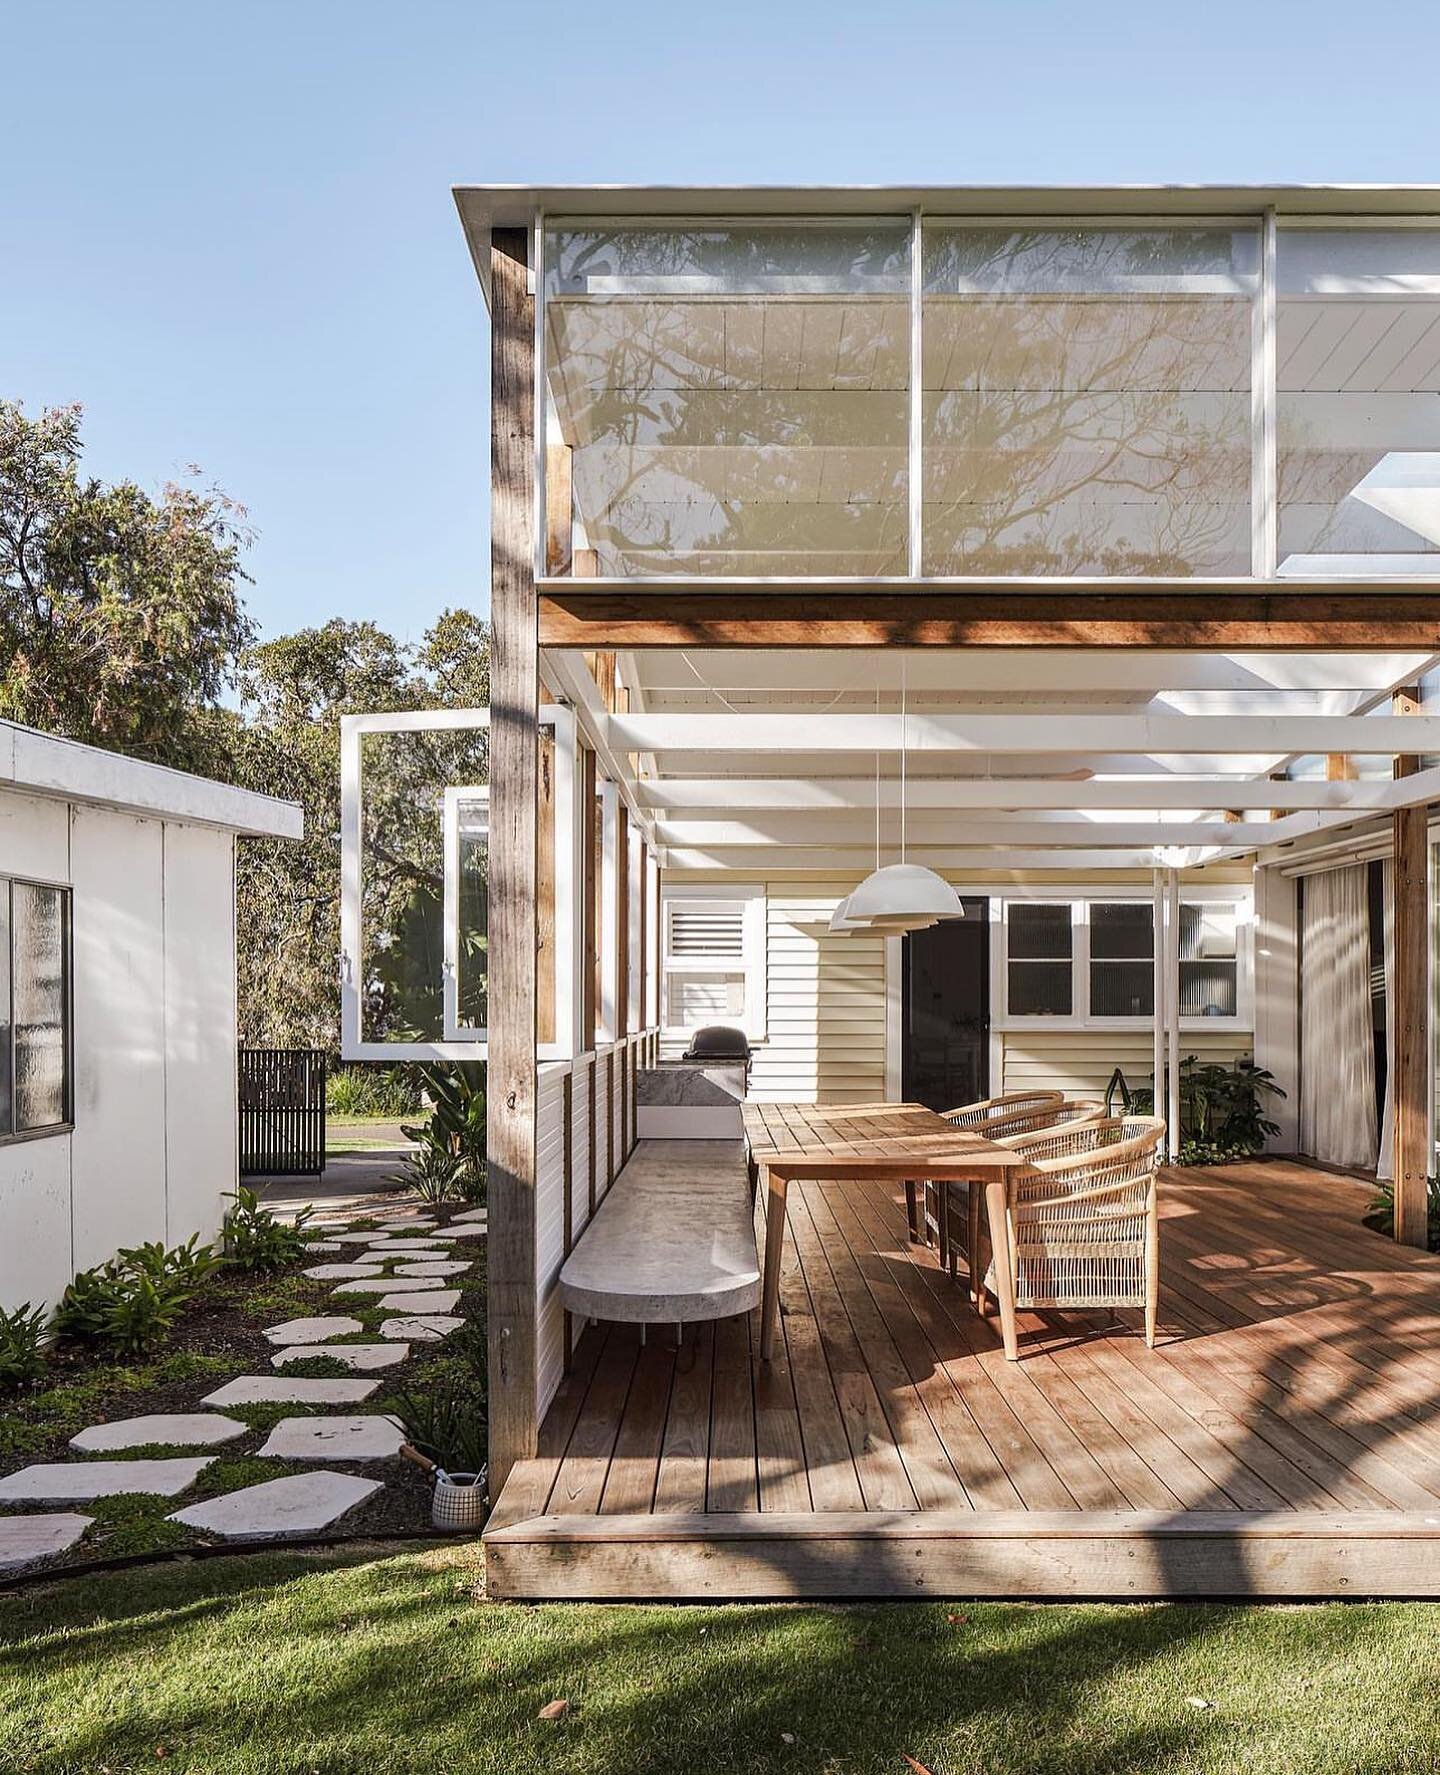 Converted beach shack but make it cool. 🤙🏻 Stay Awhile @cocoatculburra 

Unwind at Coco at Culburra, a charming modern beach shack blending 1950s nostalgia with every contemporary comfort. 🌊 Newly renovated, this 3-bedroom haven boasts air con, a 